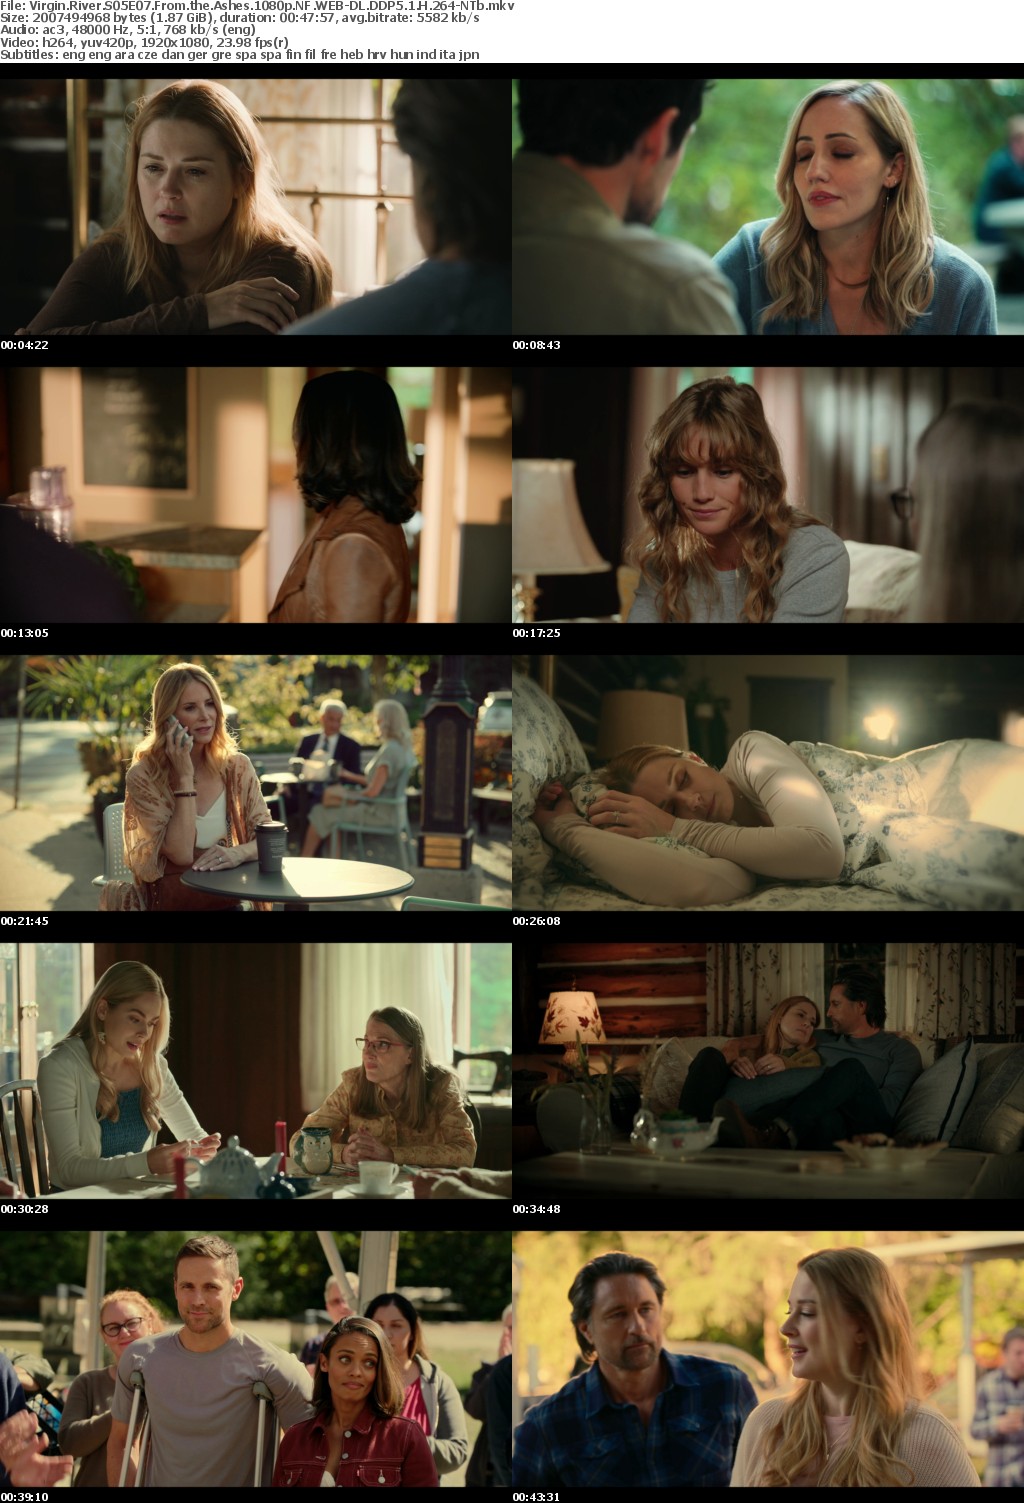 Virgin River S05E07 From the Ashes 1080p NF WEB-DL DDP5 1 H 264-NTb